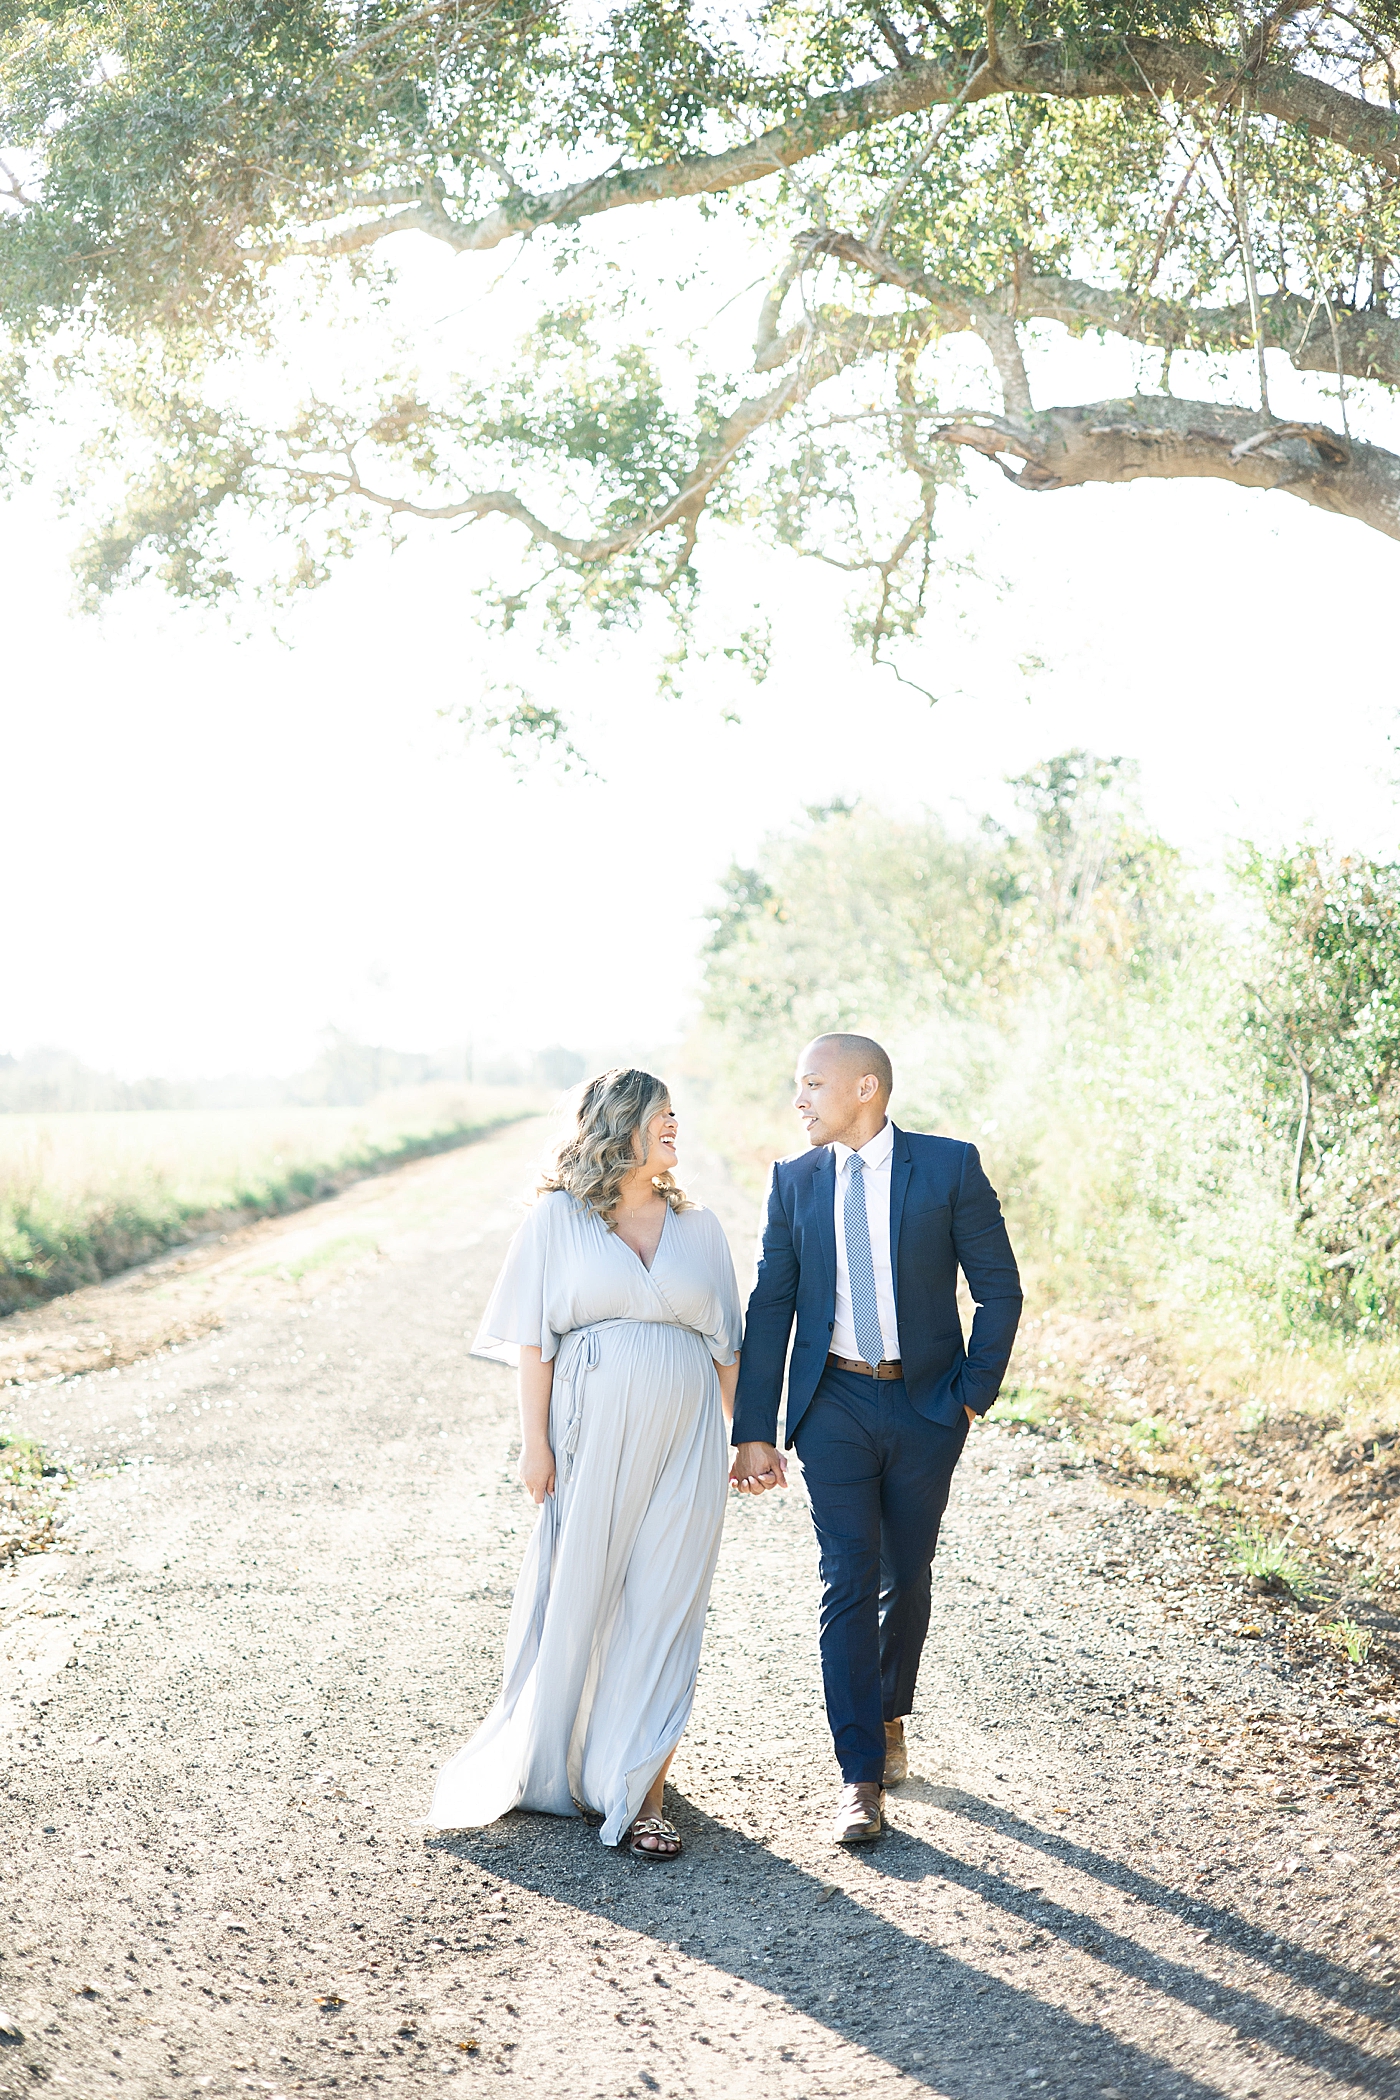 Mom and dad to be walking together down a path | Photo by Gulfport MS Maternity and Newborn Photographer Little Sunshine Photography 